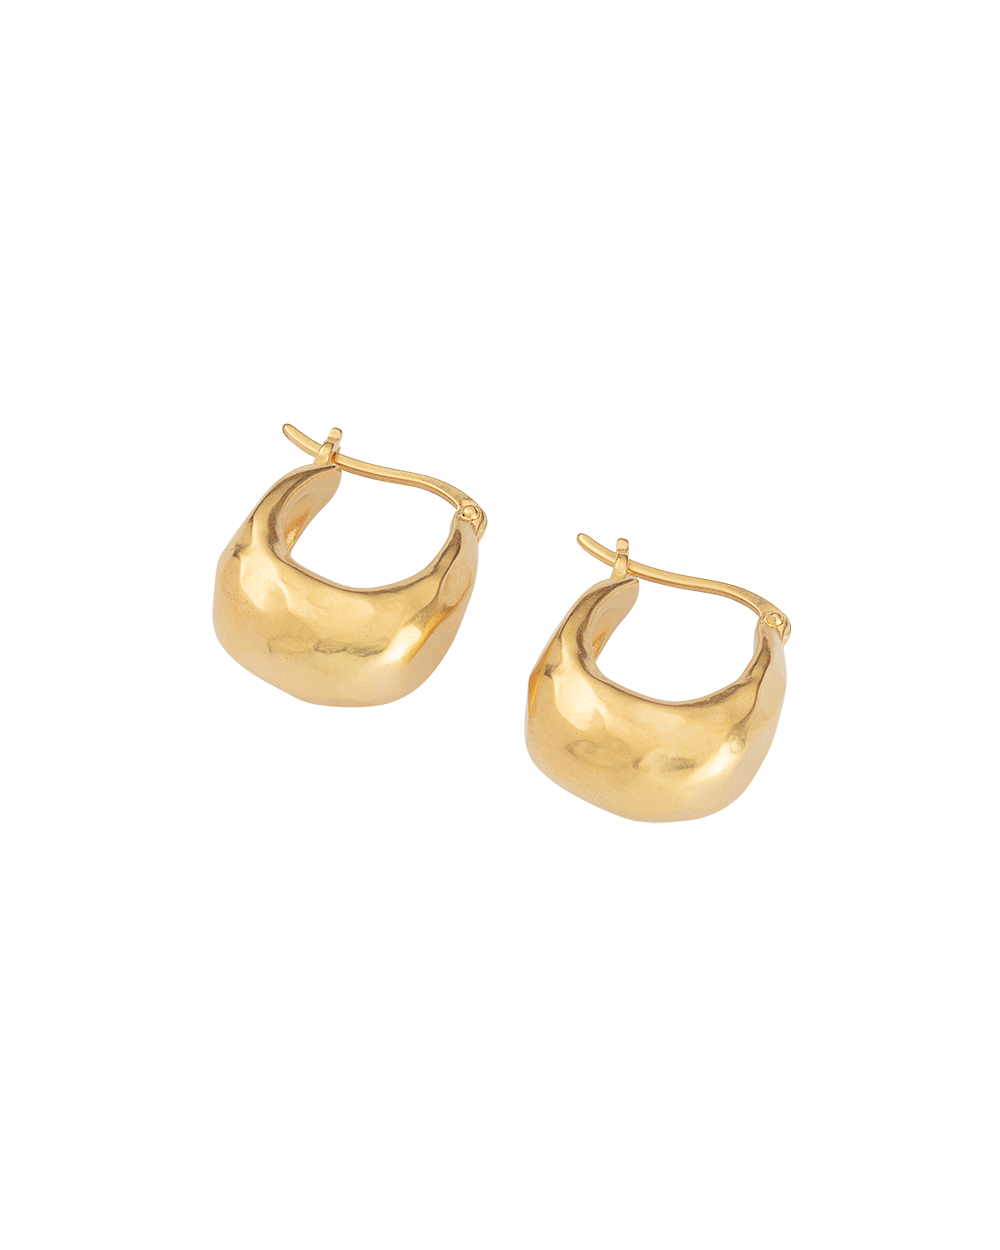 ESSENCE HOOPS SMALL (18K GOLD PLATED) – KIRSTIN ASH (United States)